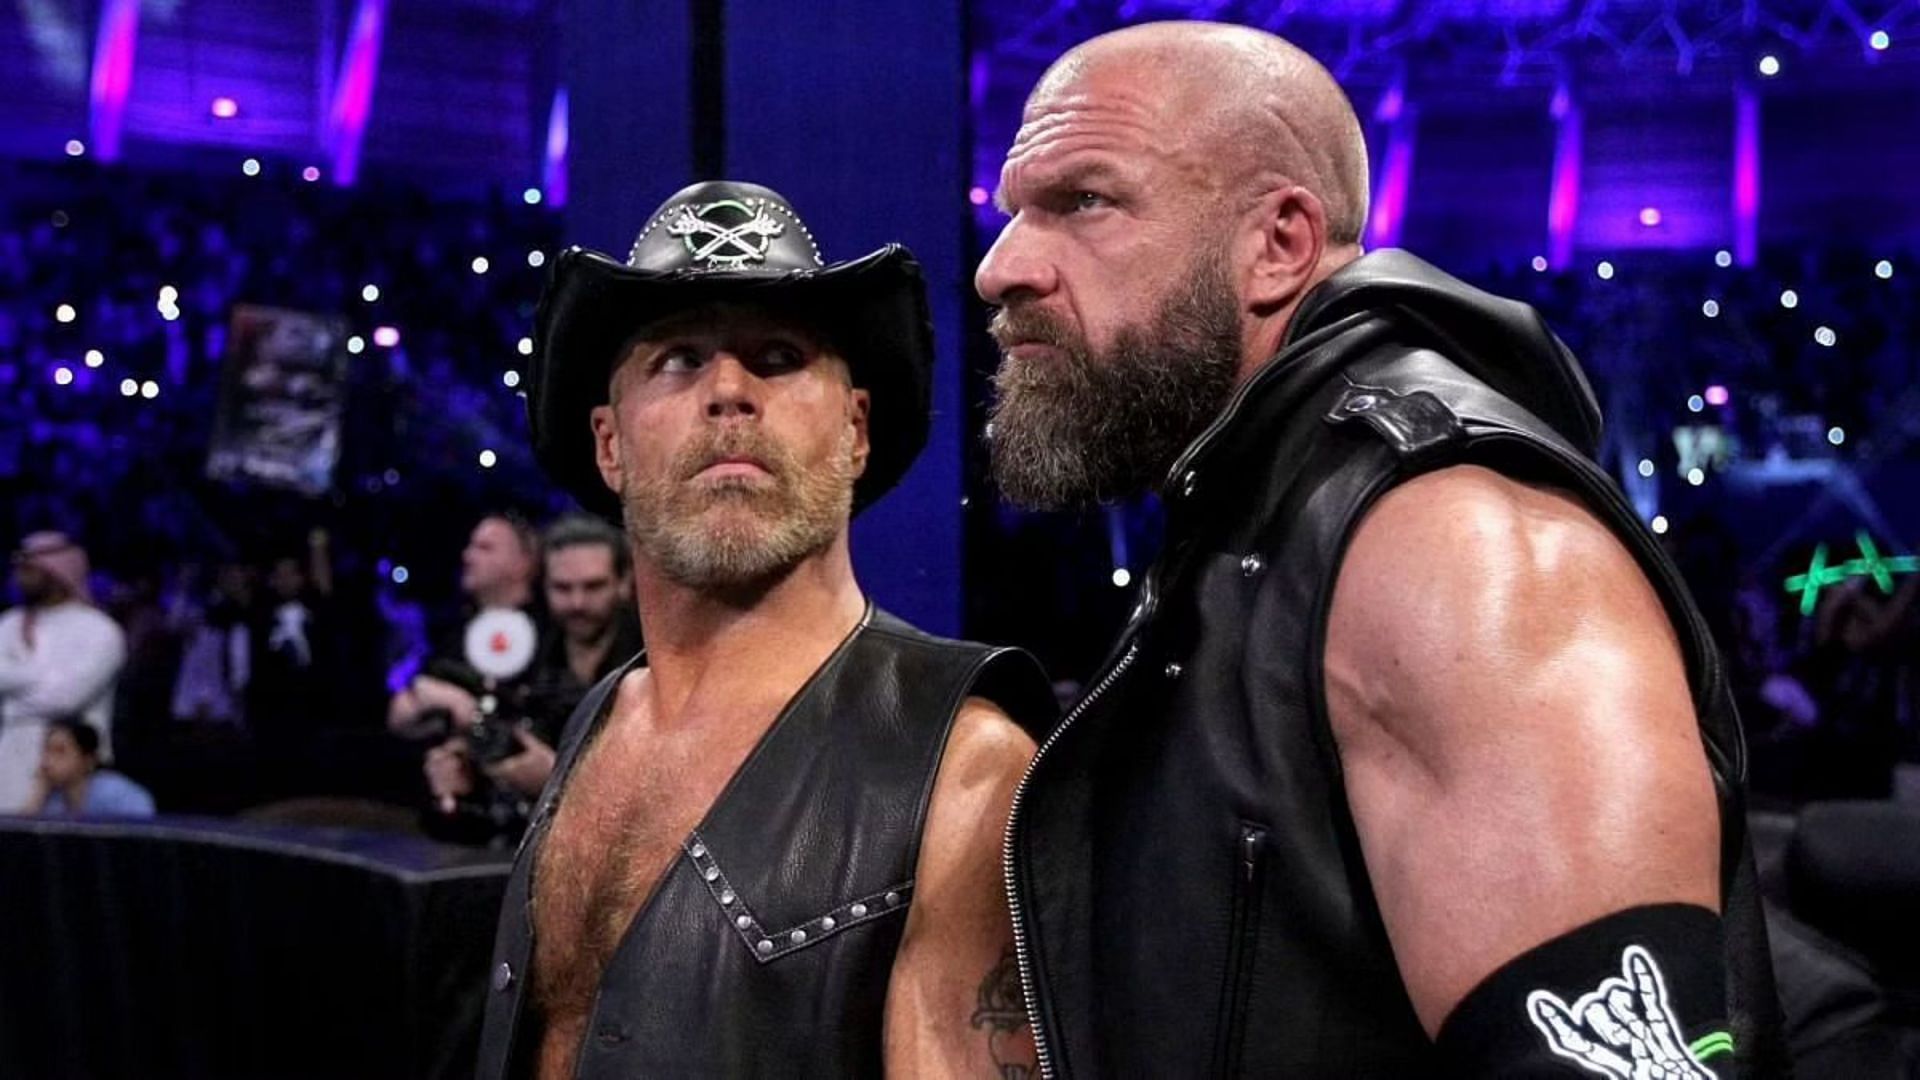 Triple H and Shawn Michaels had a fallout in 2001